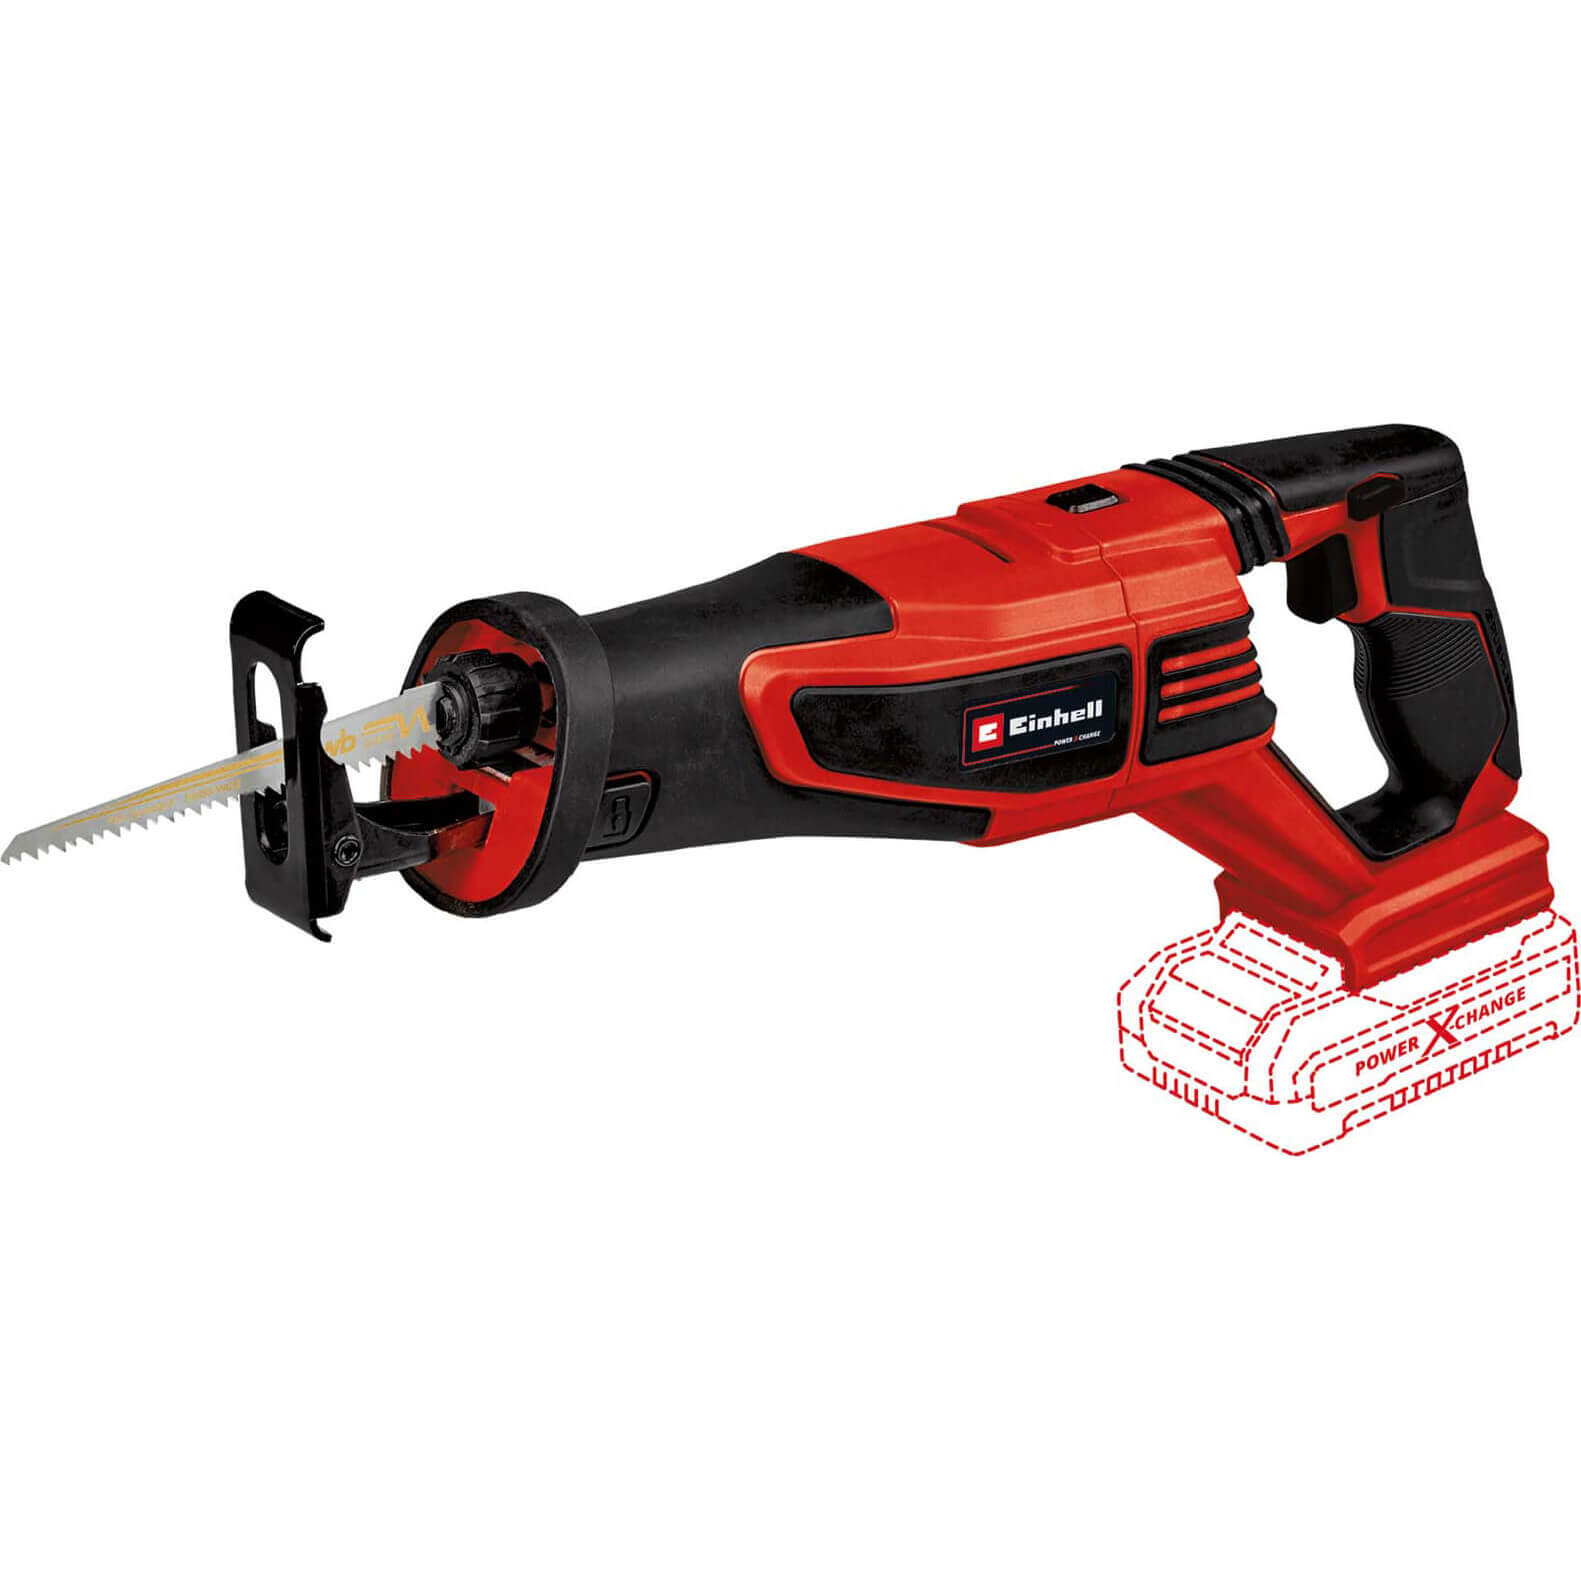 Image of Einhell TE-AP Li BL 18v Cordless Brushless Reciprocating Saw No Batteries No Charger No Case